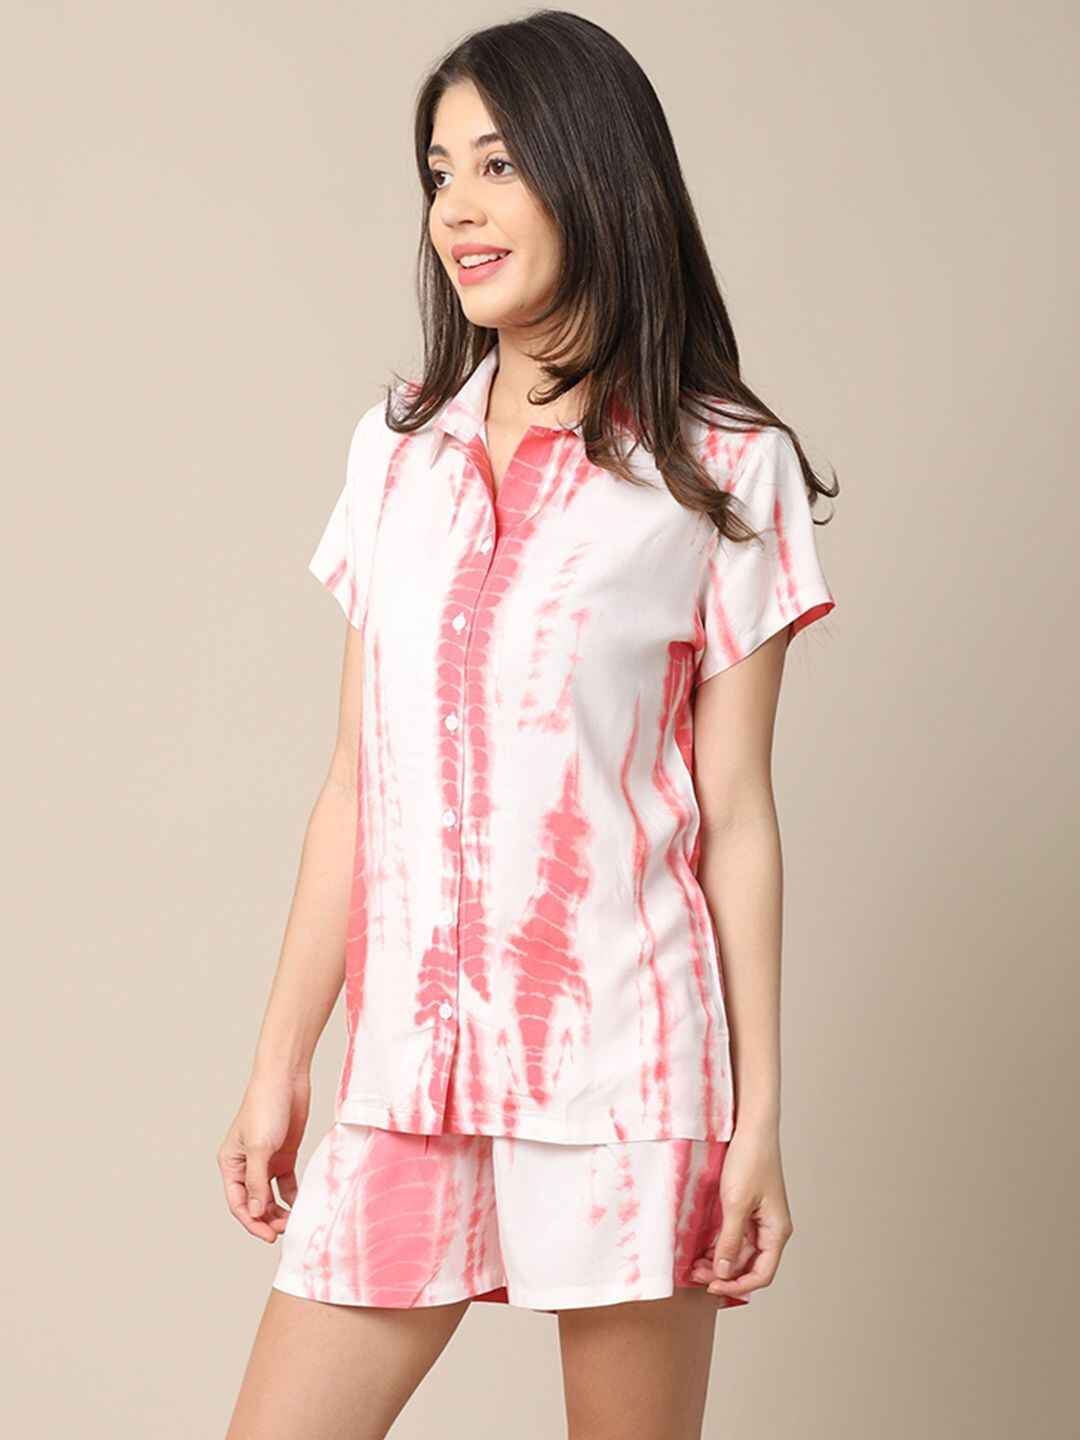 Pink Color Tie and Dye Printed Cotton Shorts Set Claura Designs Pvt. Ltd. Lounge Short Cotton, Nightsuit, Pink, Printed